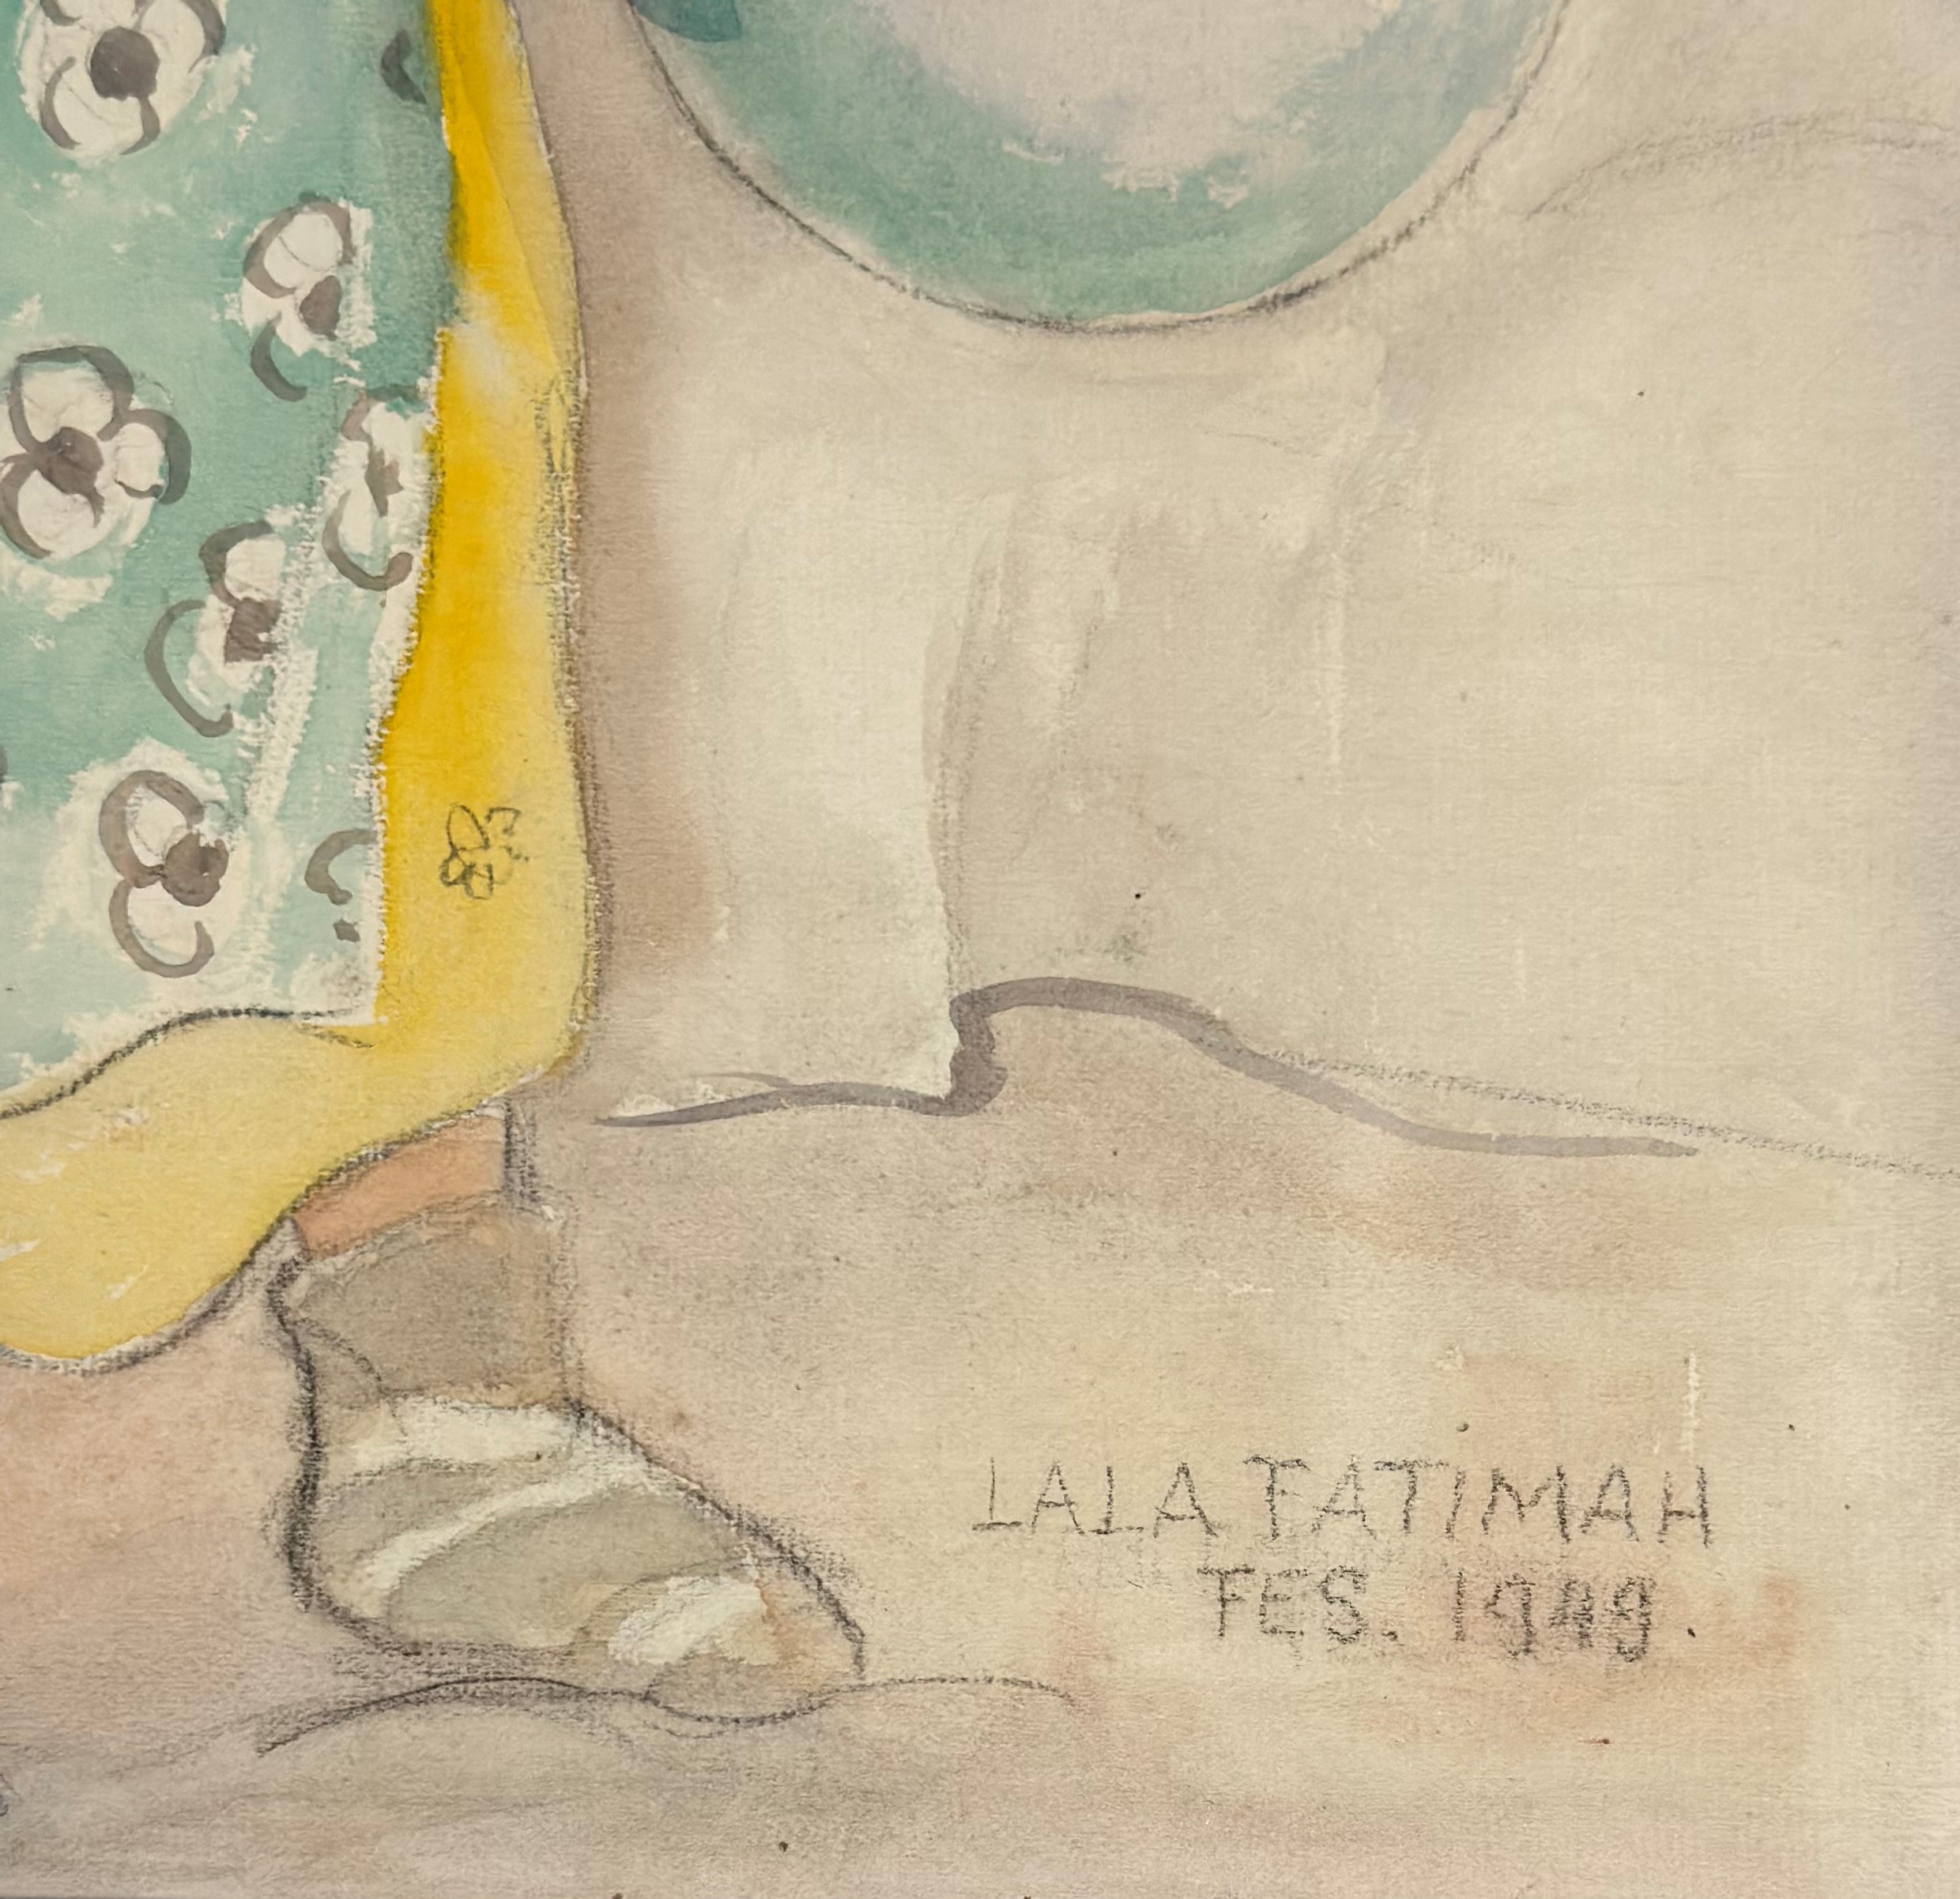 Ruth Moorwood (Scottish, exh. 1927-37), "Lala Fatimah", portrait of a young girl with balloons, - Image 3 of 3